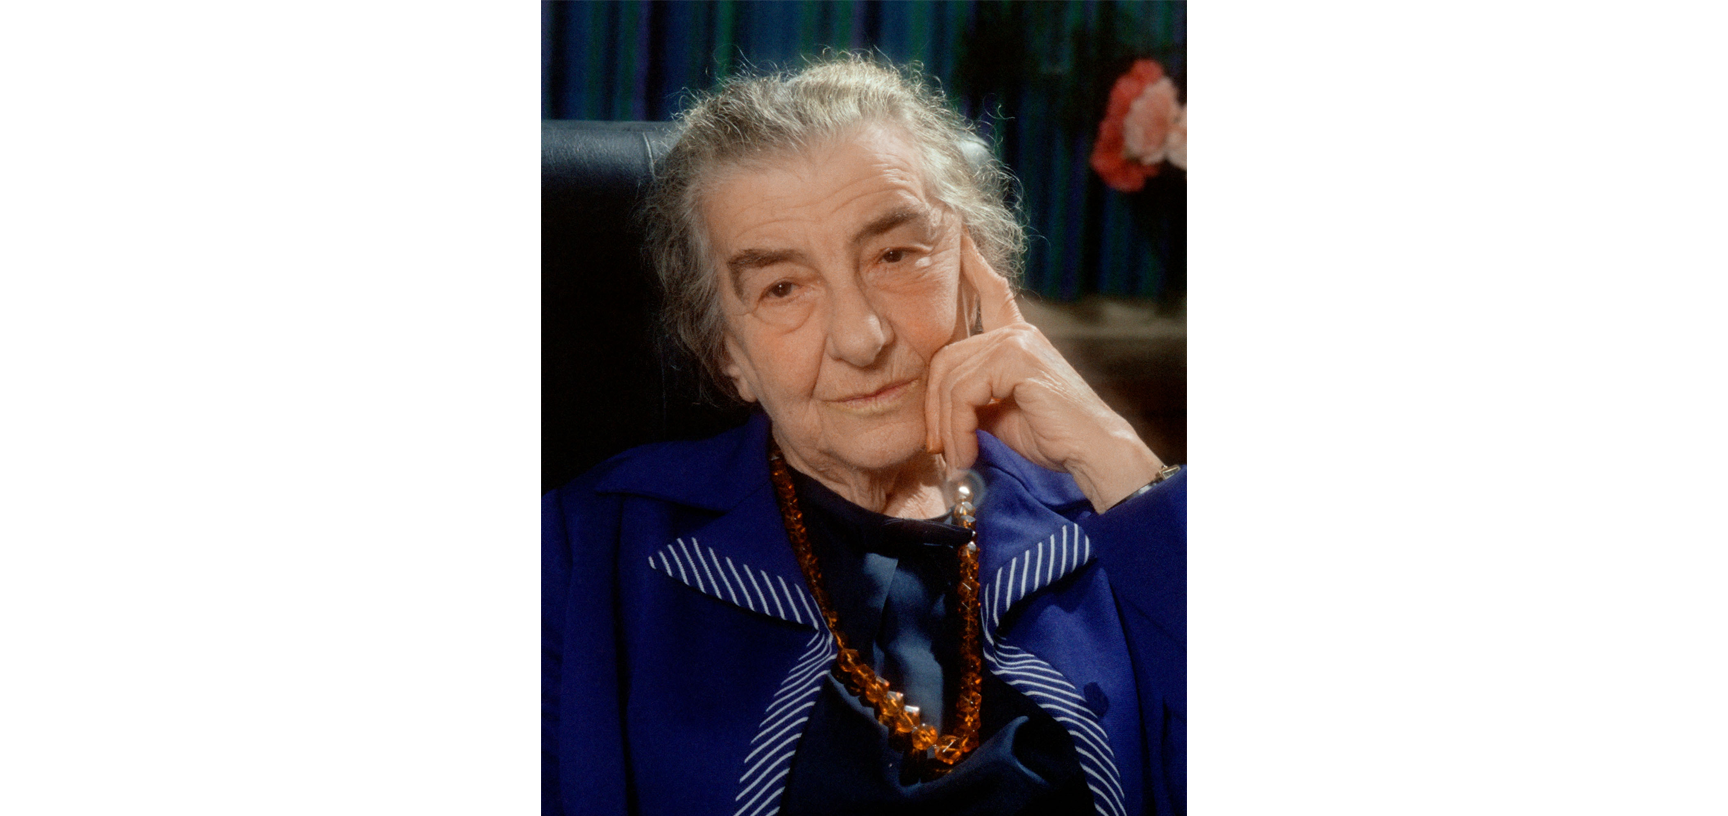 Portrait of Golda Meir - a older white woman with grey hair tied up, dressed in a navy dress and navy blazer with a brown beaded necklace, looking into the camera with her head resting on her hand